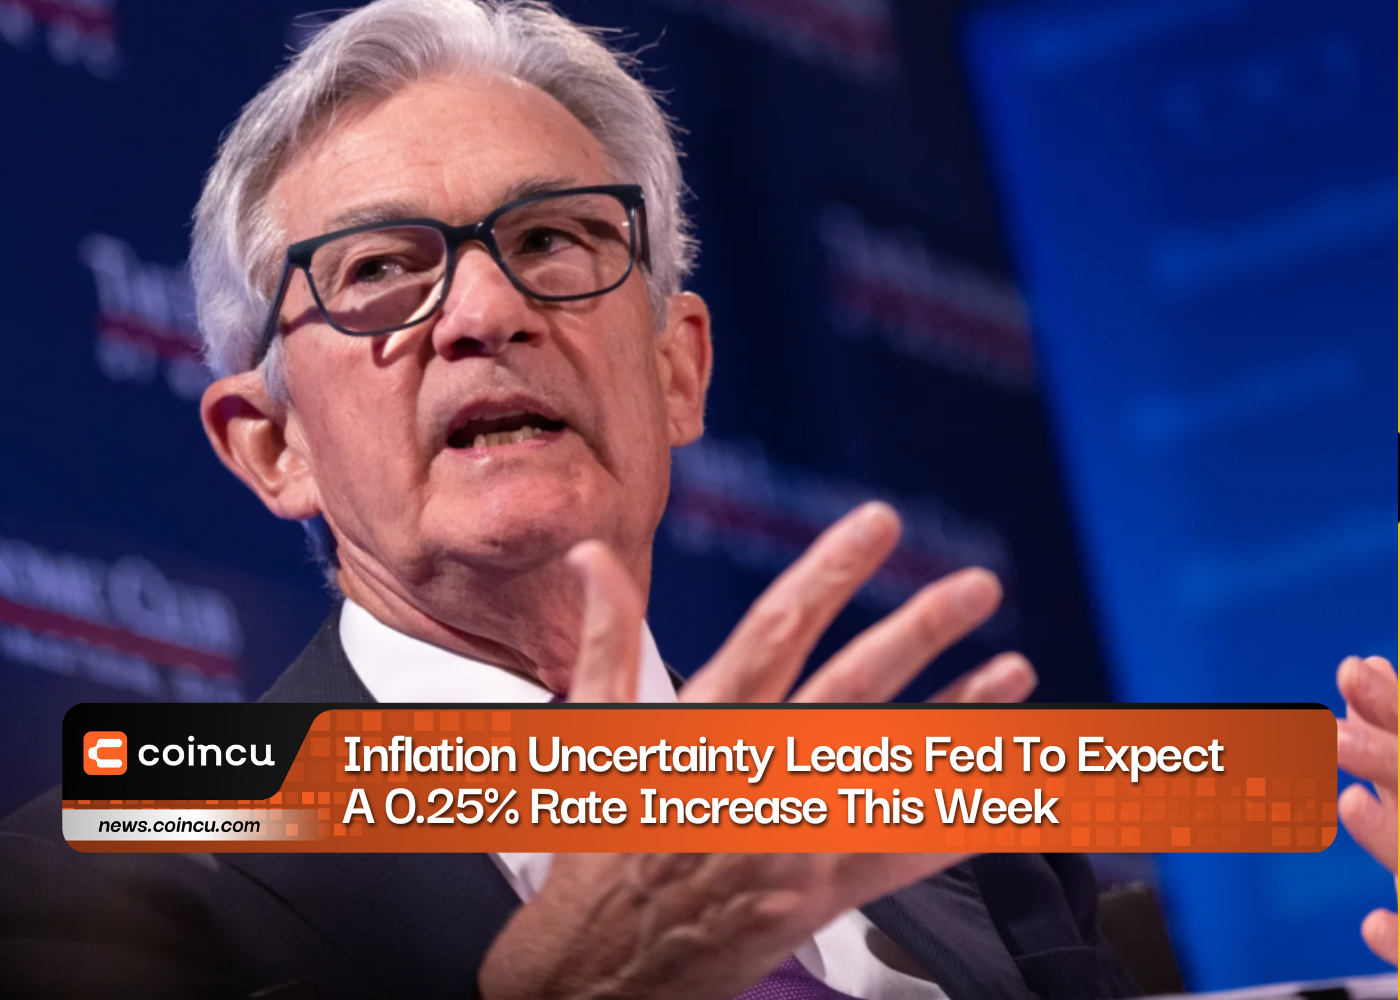 Inflation Uncertainty Leads Fed To Expect A 0.25% Rate Increase This Week